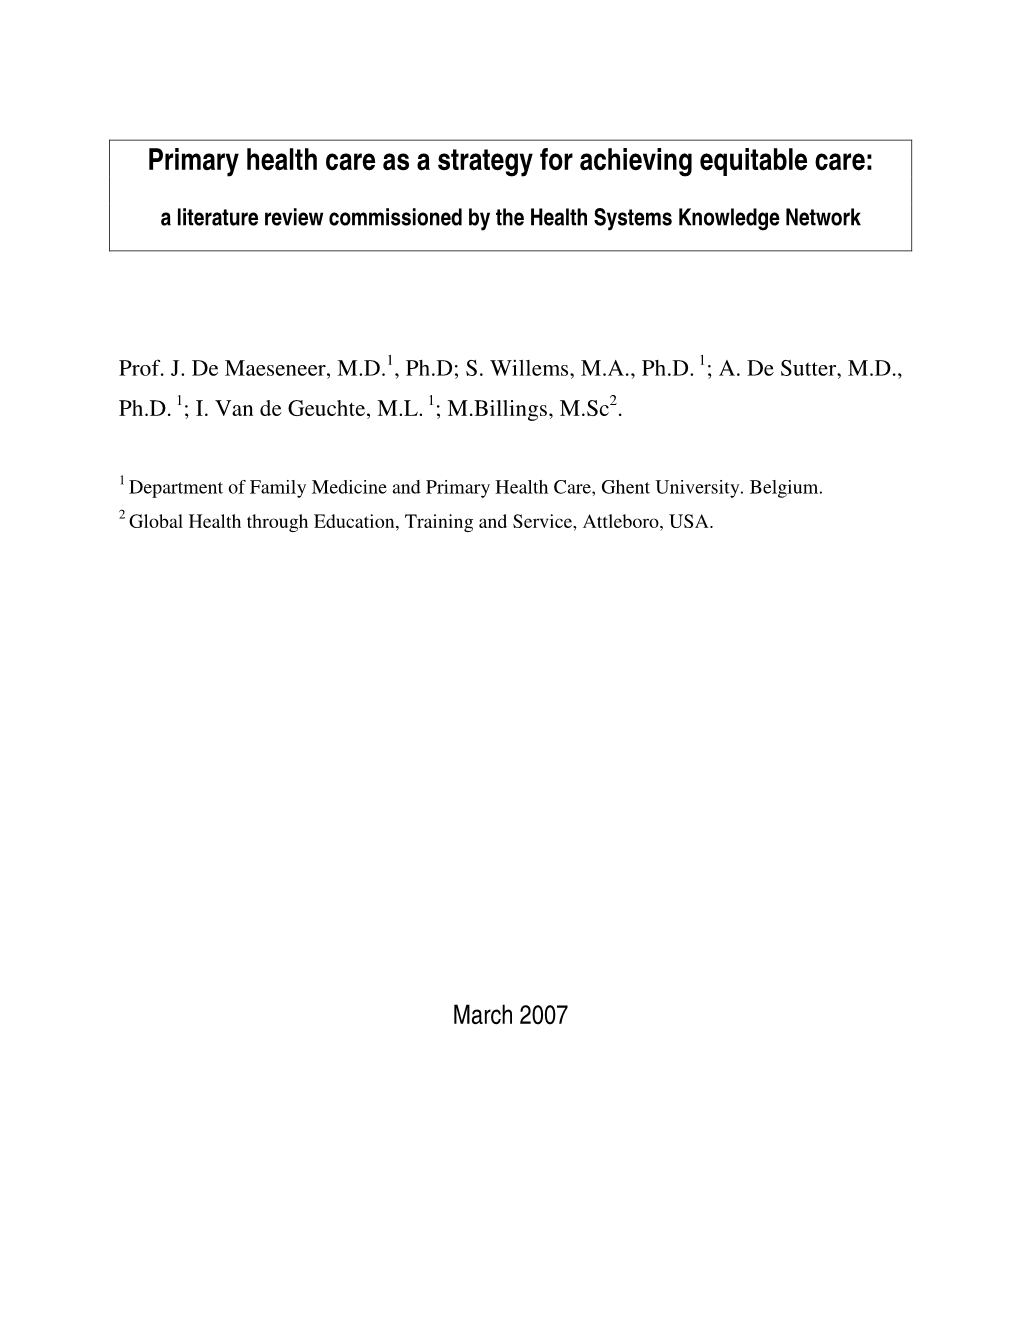 Primary Health Care As a Strategy for Achieving Equitable Care